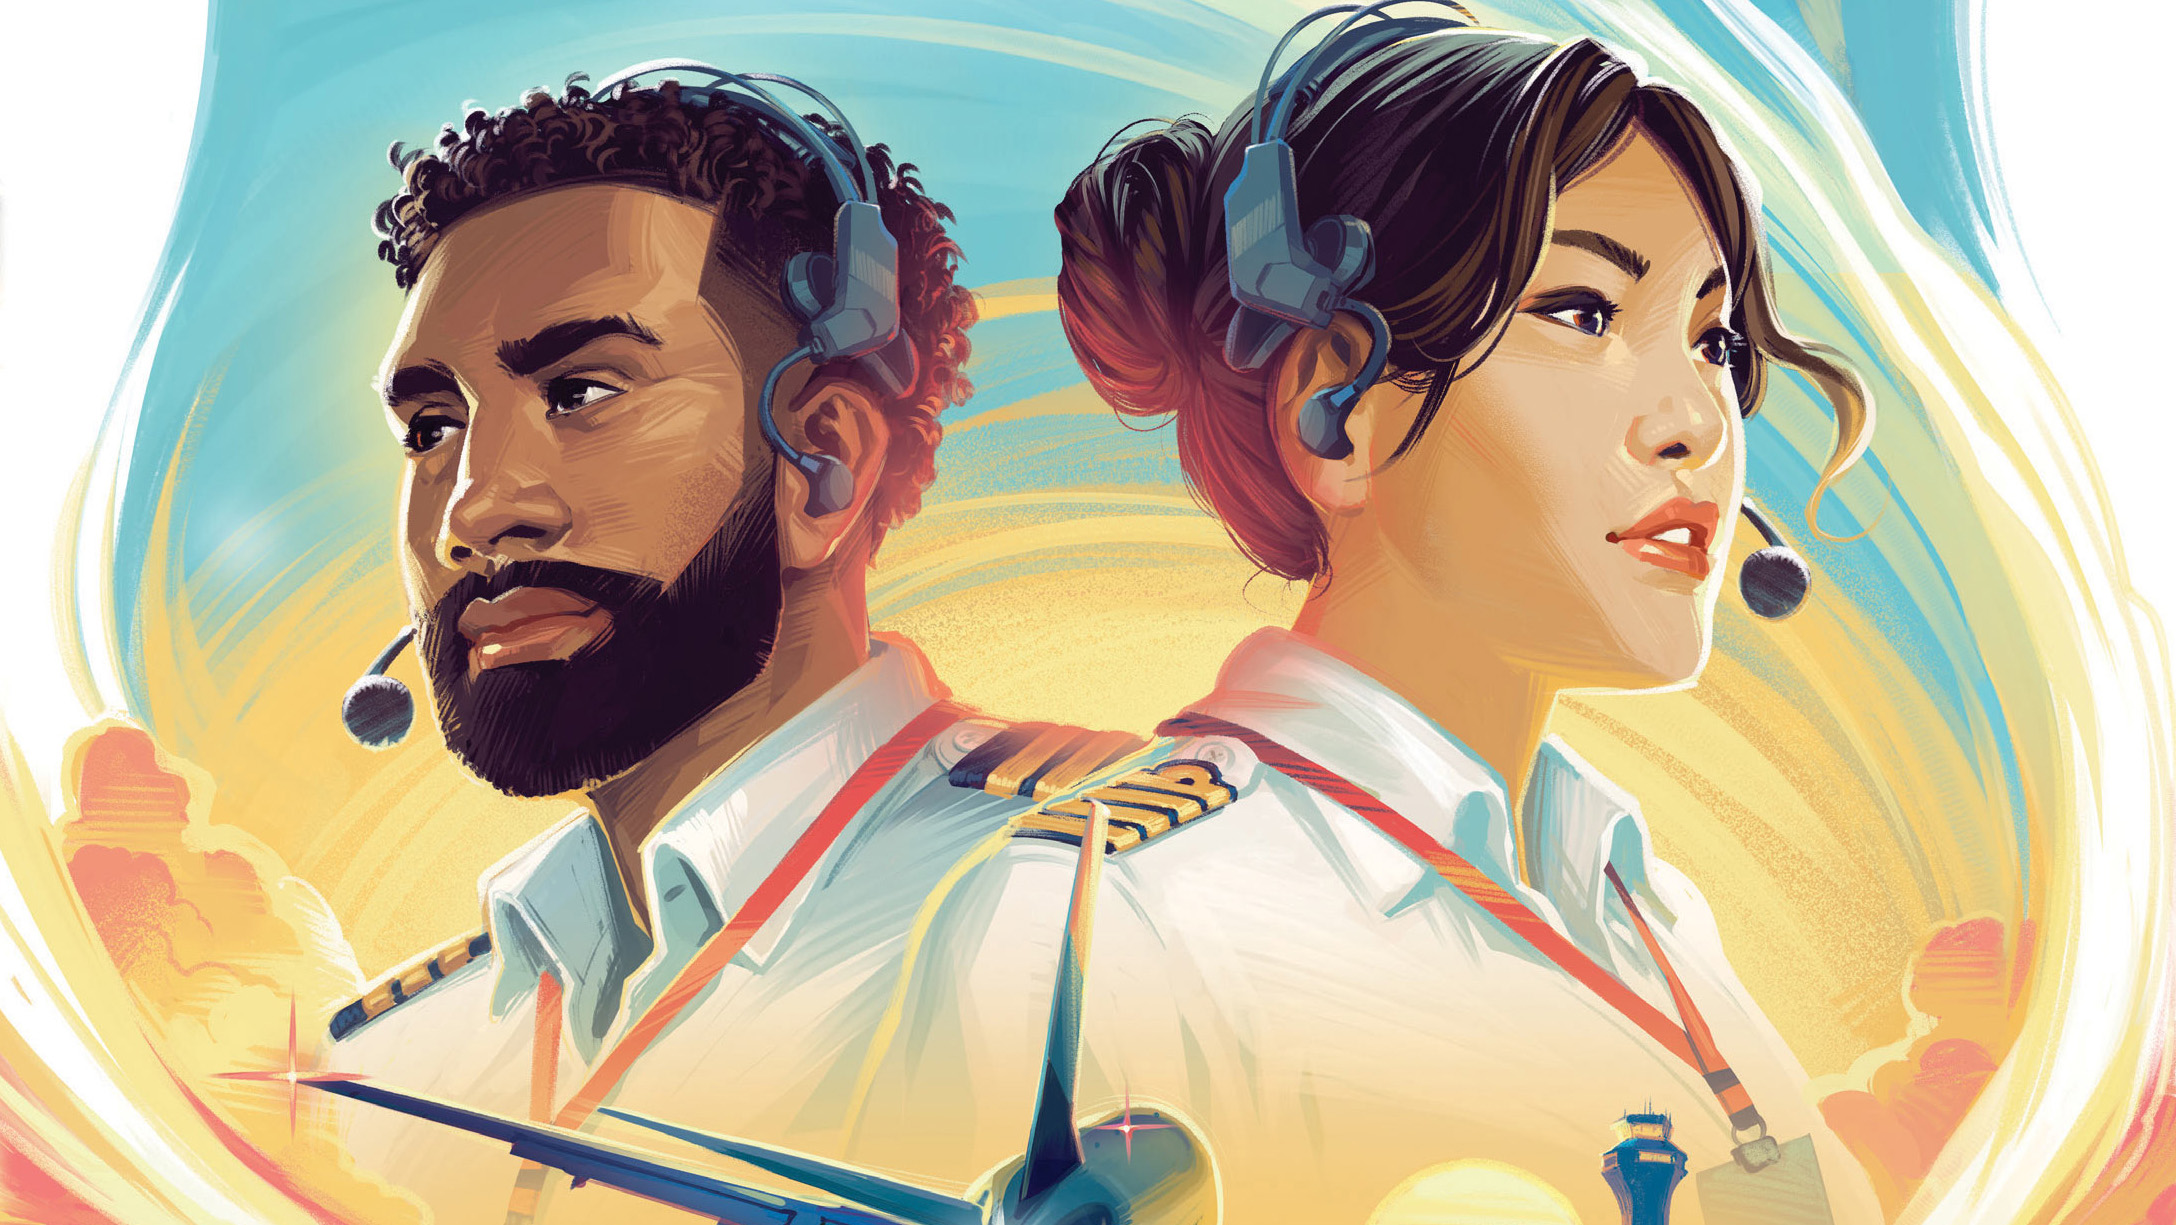 Cover art for Sky Team shows two pilots back-to-back with an airliner positioned over the runway below them.